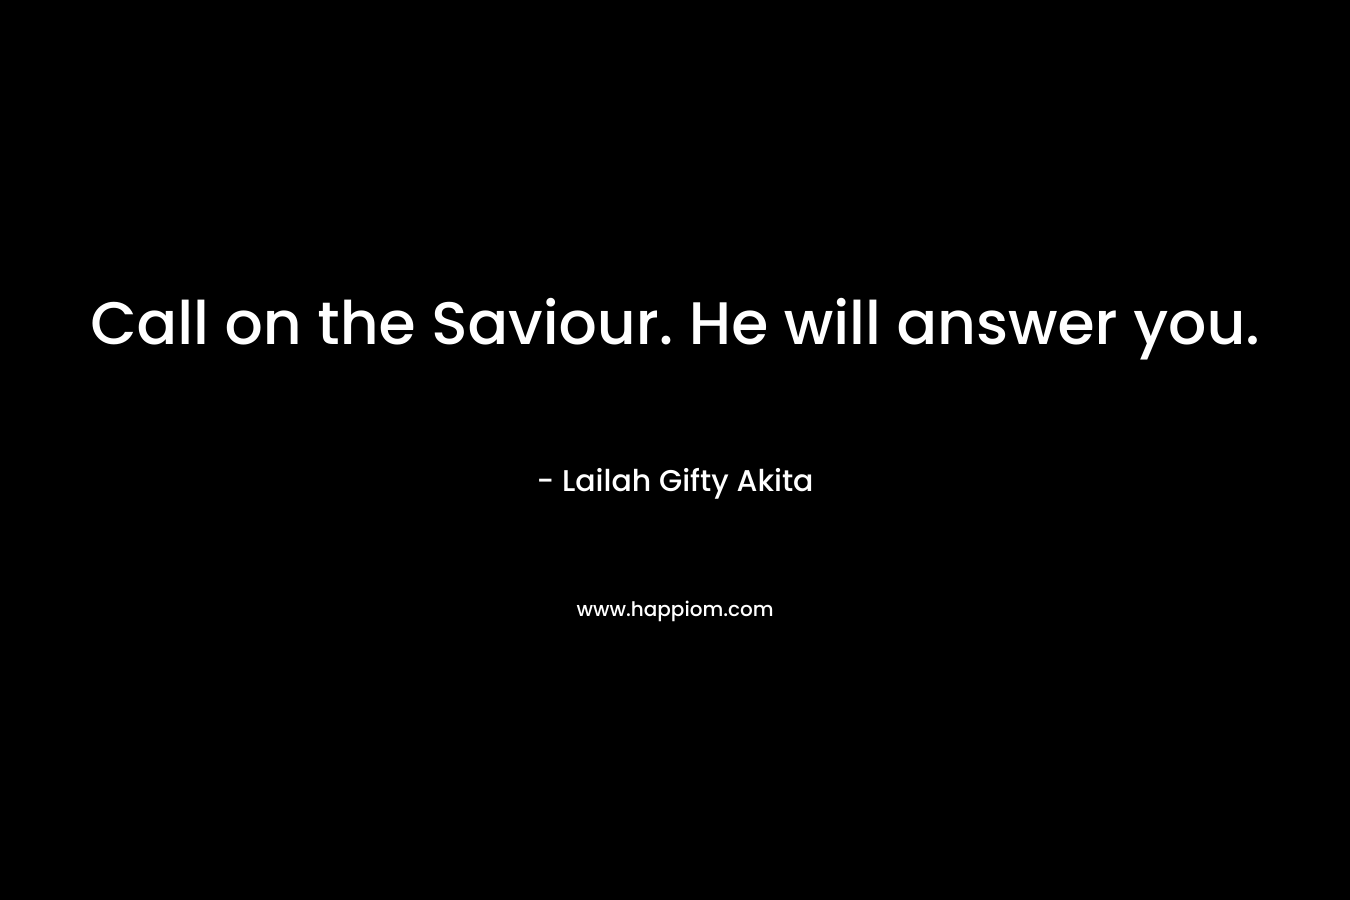 Call on the Saviour. He will answer you.